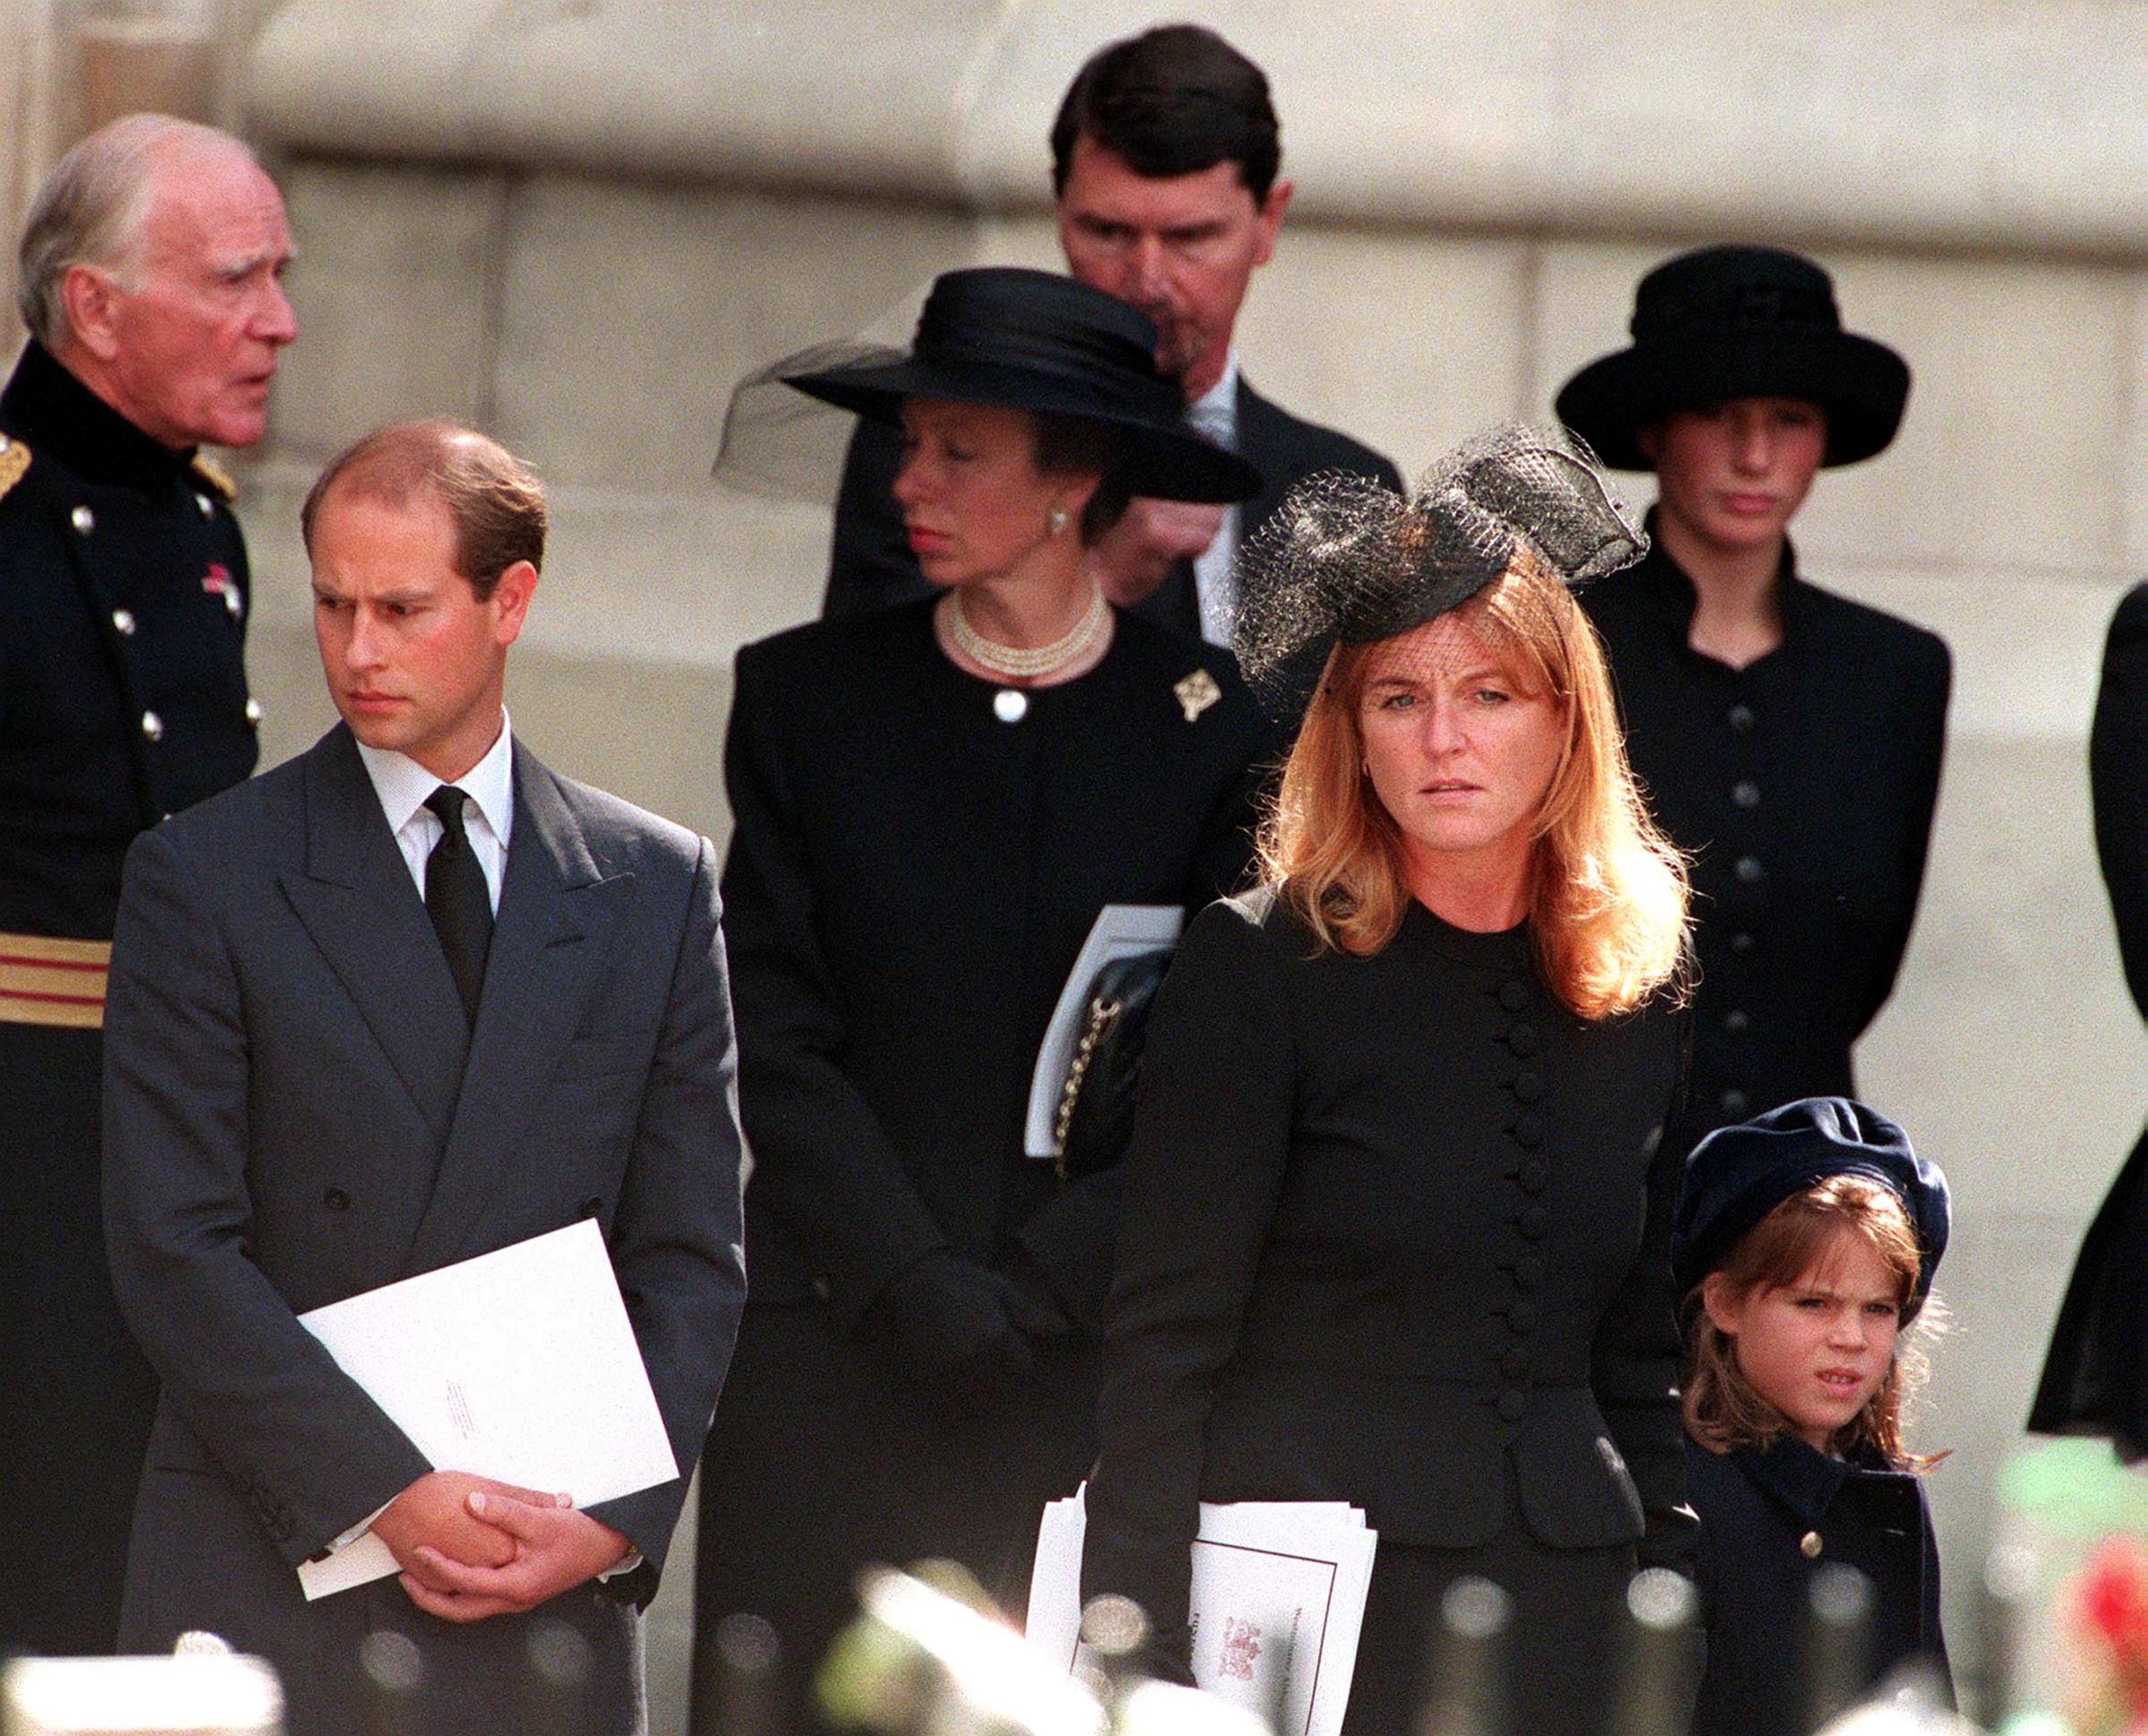 <p>Prince Edward, Princess Anne, Sir Tim Laurence, Sarah, Duchess of York and Princess Eugenie were photographed leaving Westminster Abbey in London after the funeral service for Princess Diana on Sept. 6, 1997.</p>